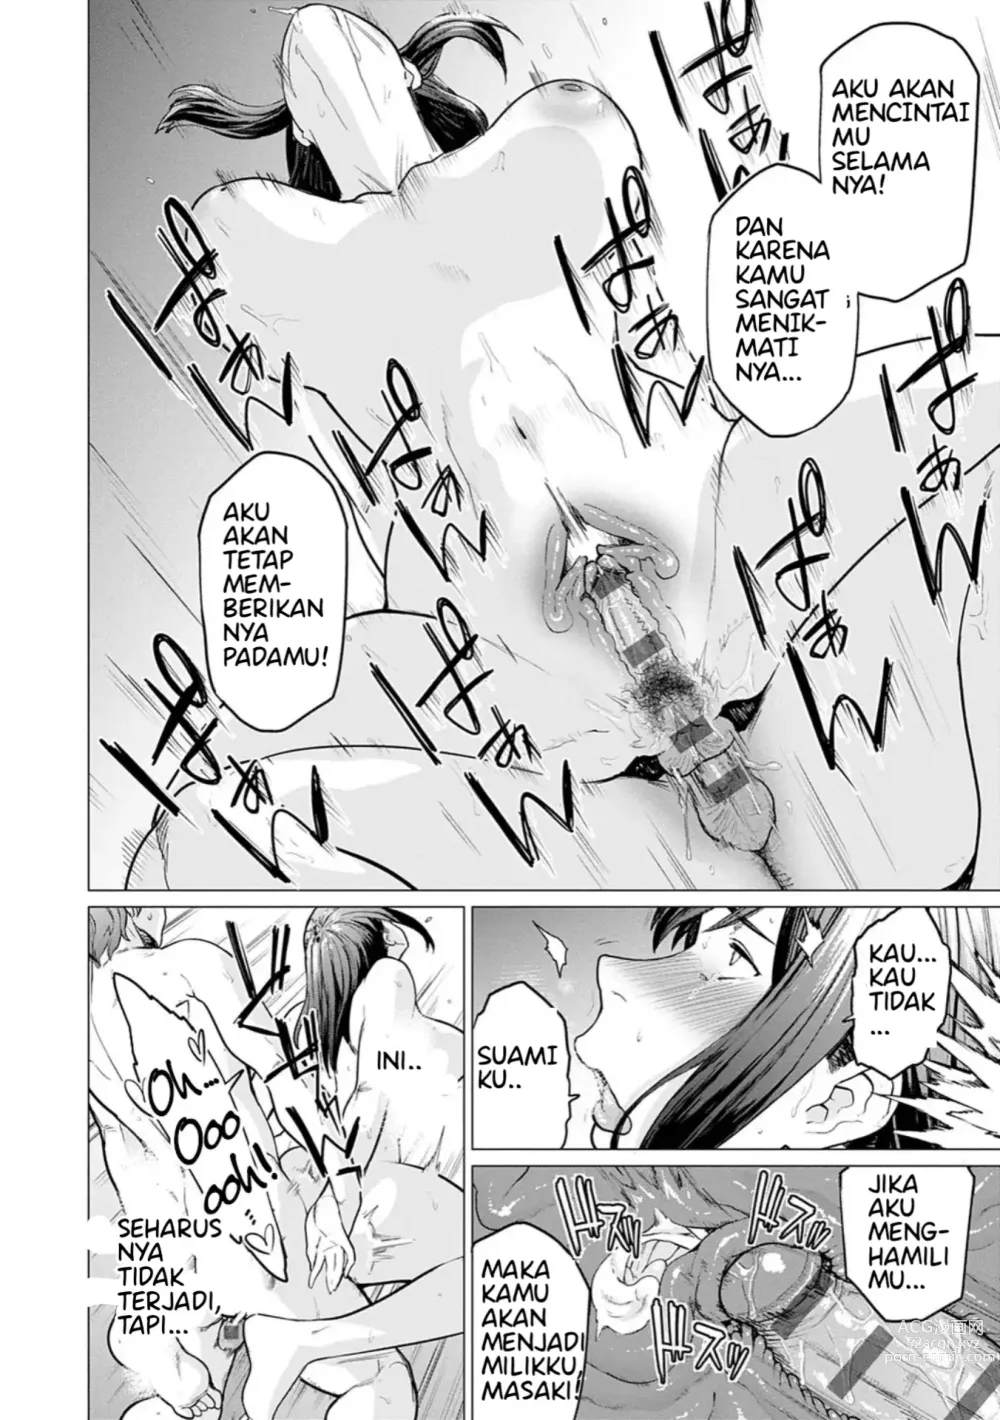 Page 23 of doujinshi The Fault That Can't Be Erased Indonesia